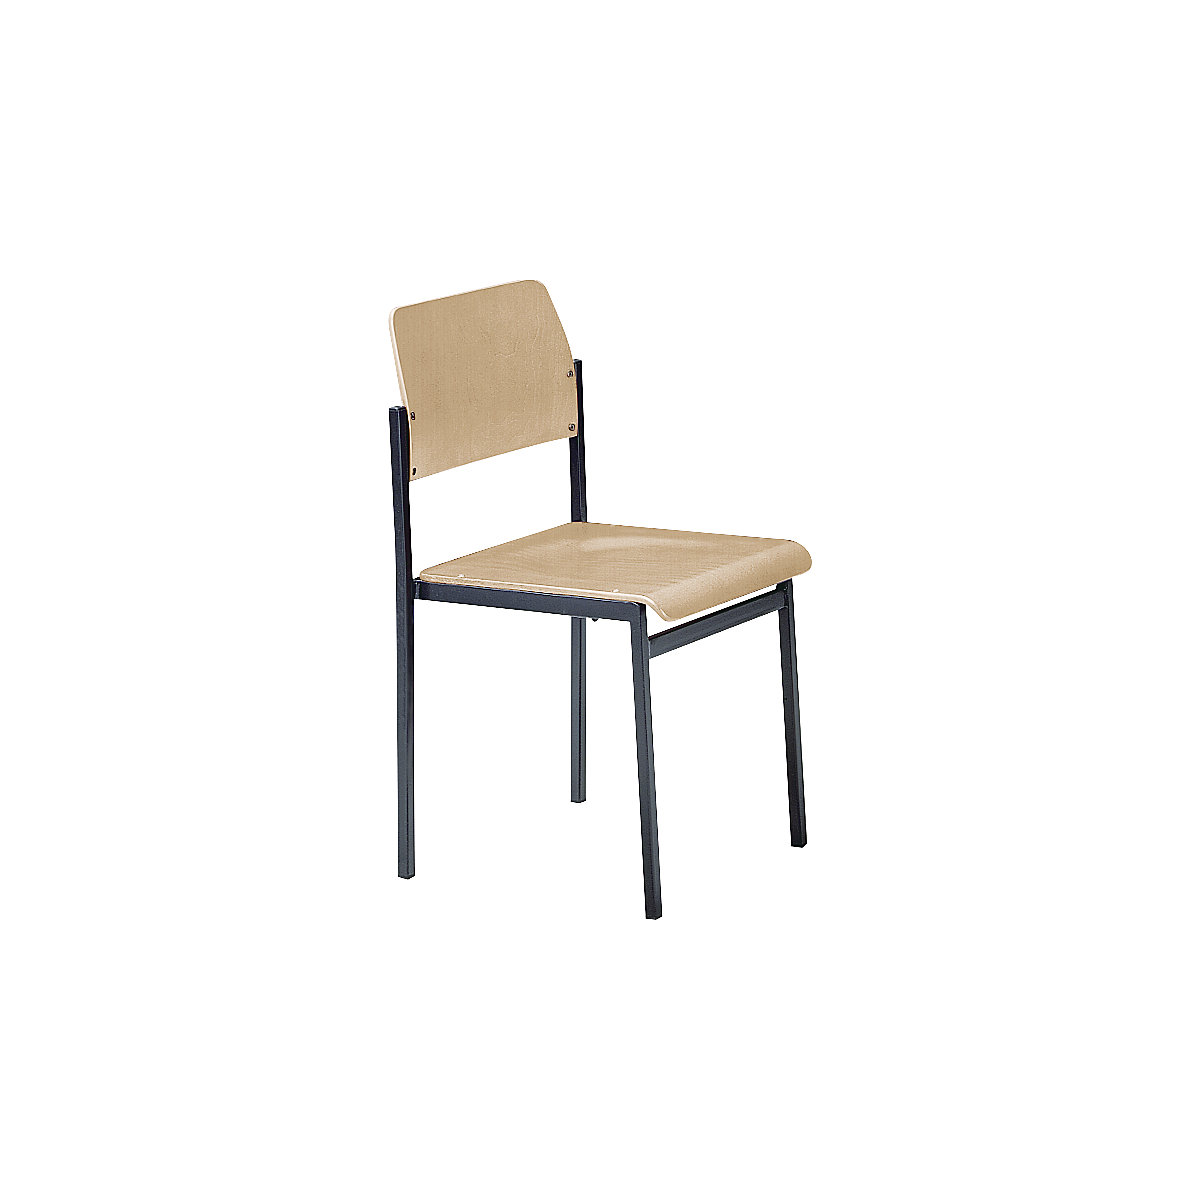 SUSAN stacking chair, powder coated frame, pack of 4, natural beech wood-3